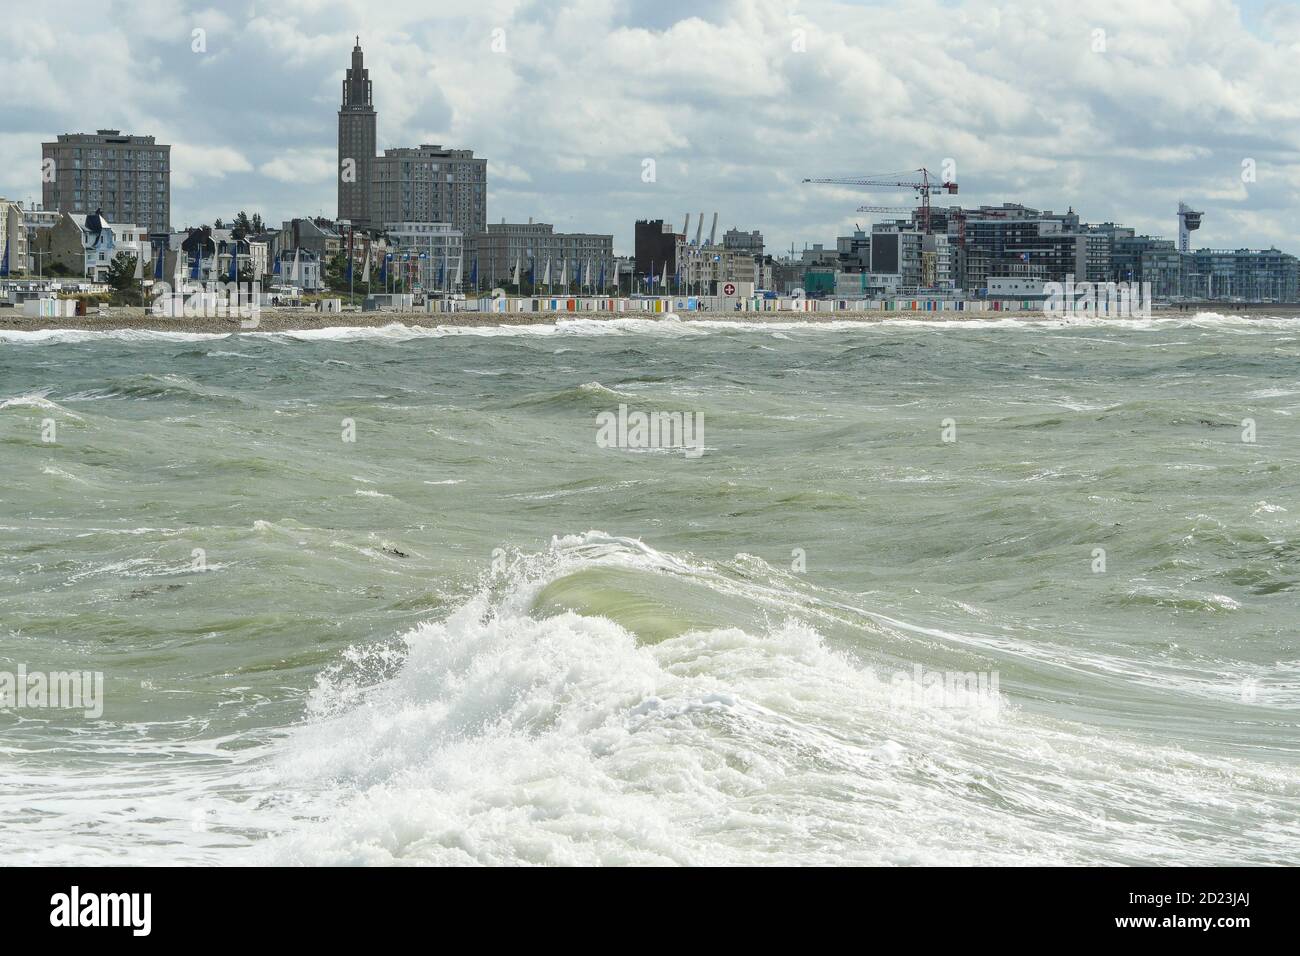 Le Havre beach and seaside promenade seen on a stormy day, Le Havre, Seine-Maritime, Normandy Region, France Stock Photo